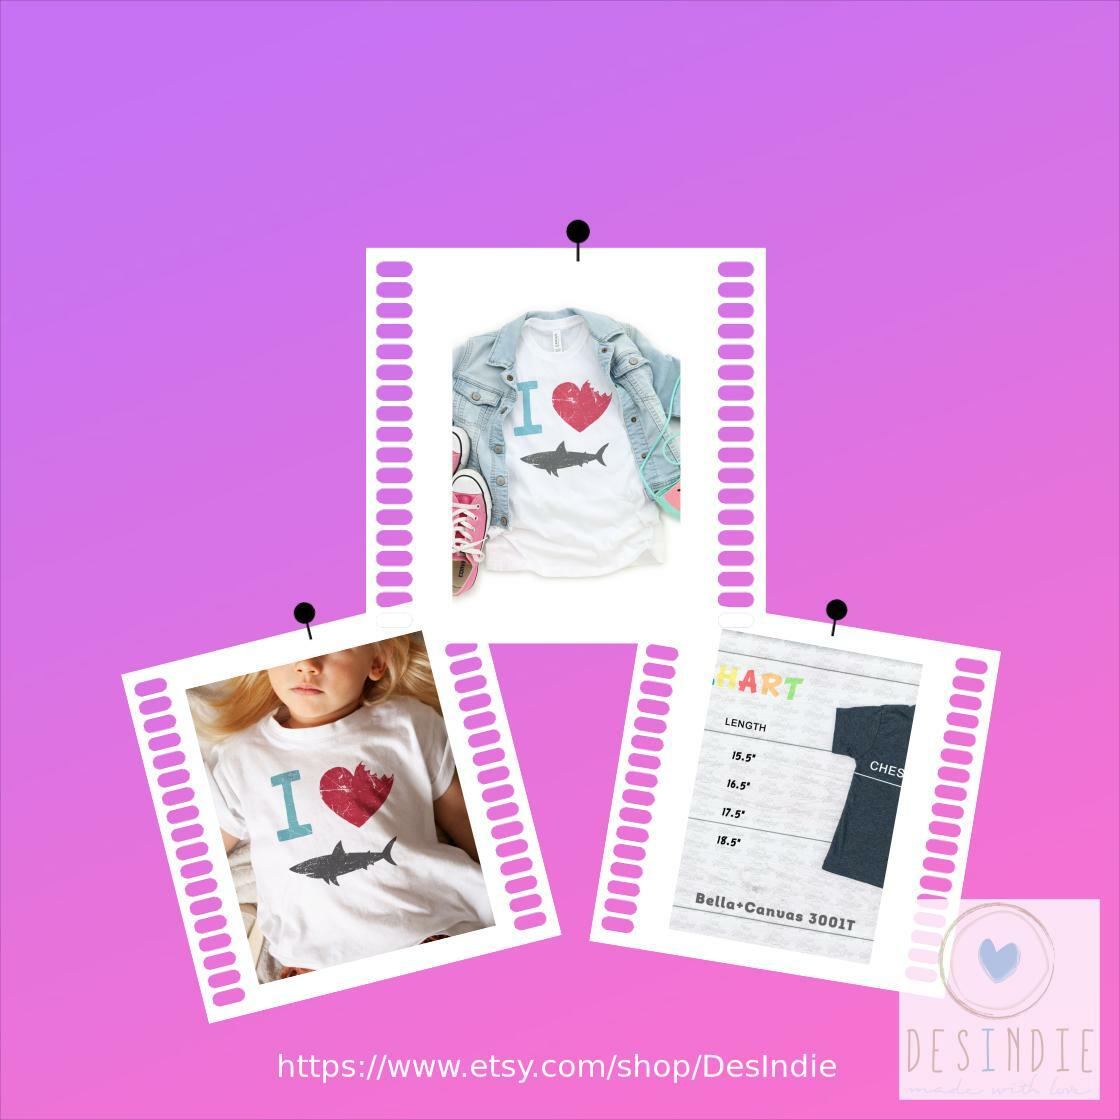 Wow picks! TODDLER | I Love Sharks Heart Bite | UNISEX Relaxed Jersey T-shirt for Toddlers at $19.99 at etsy.me/3yKDBNY Choose your wows. 🐕 #ILoveSharks #SharkLove